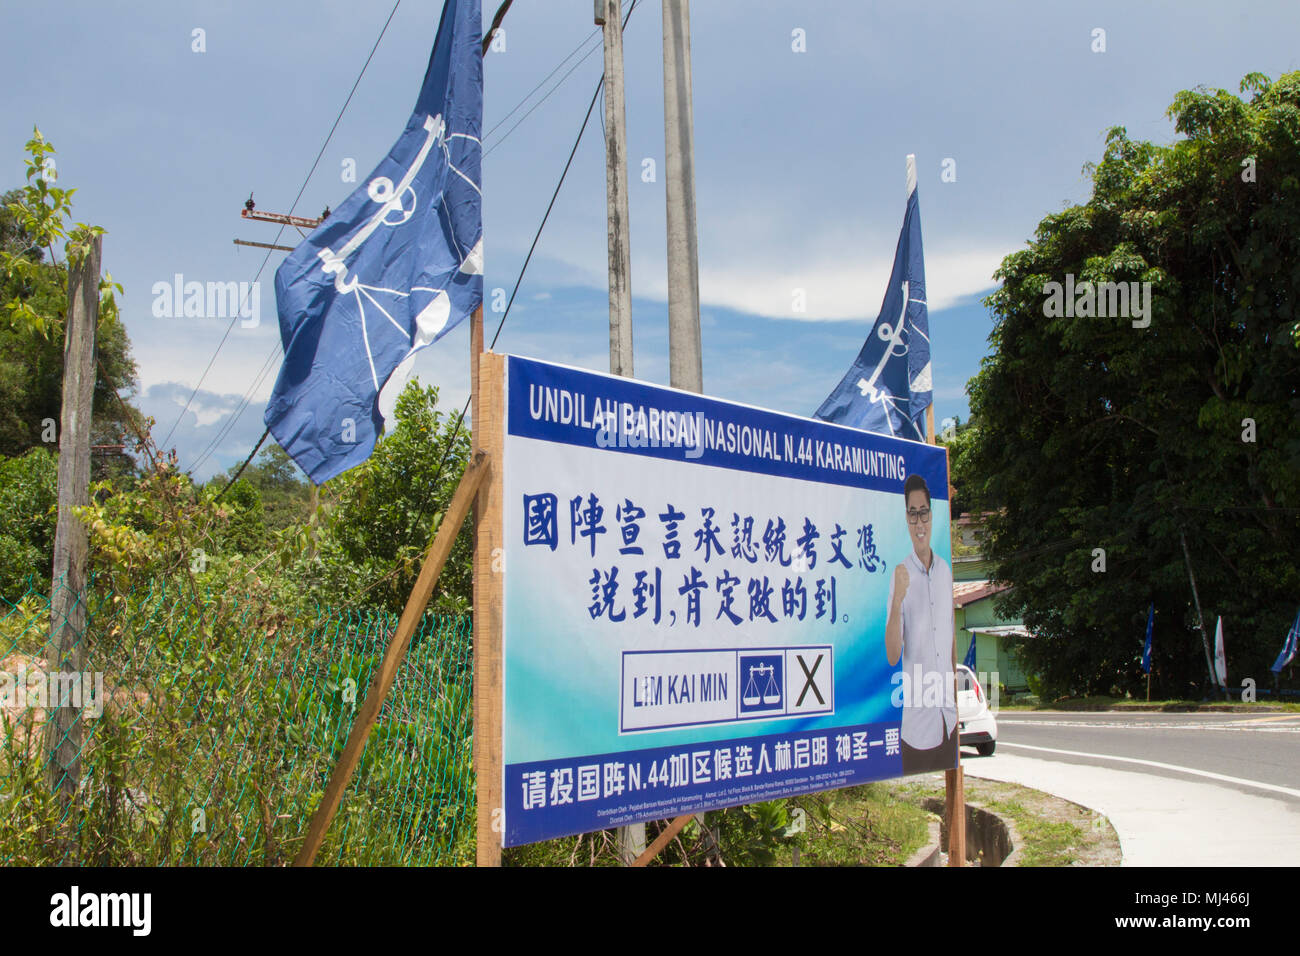 Sandakan, Malaysia. 4th May, 2018. Political party banner and flags during the Malaysia national election 2018 in Sandakan, Sabah, Malaysia. Credit: Mike Kahn Credit: Green Stock Media/Alamy Live News Stock Photo